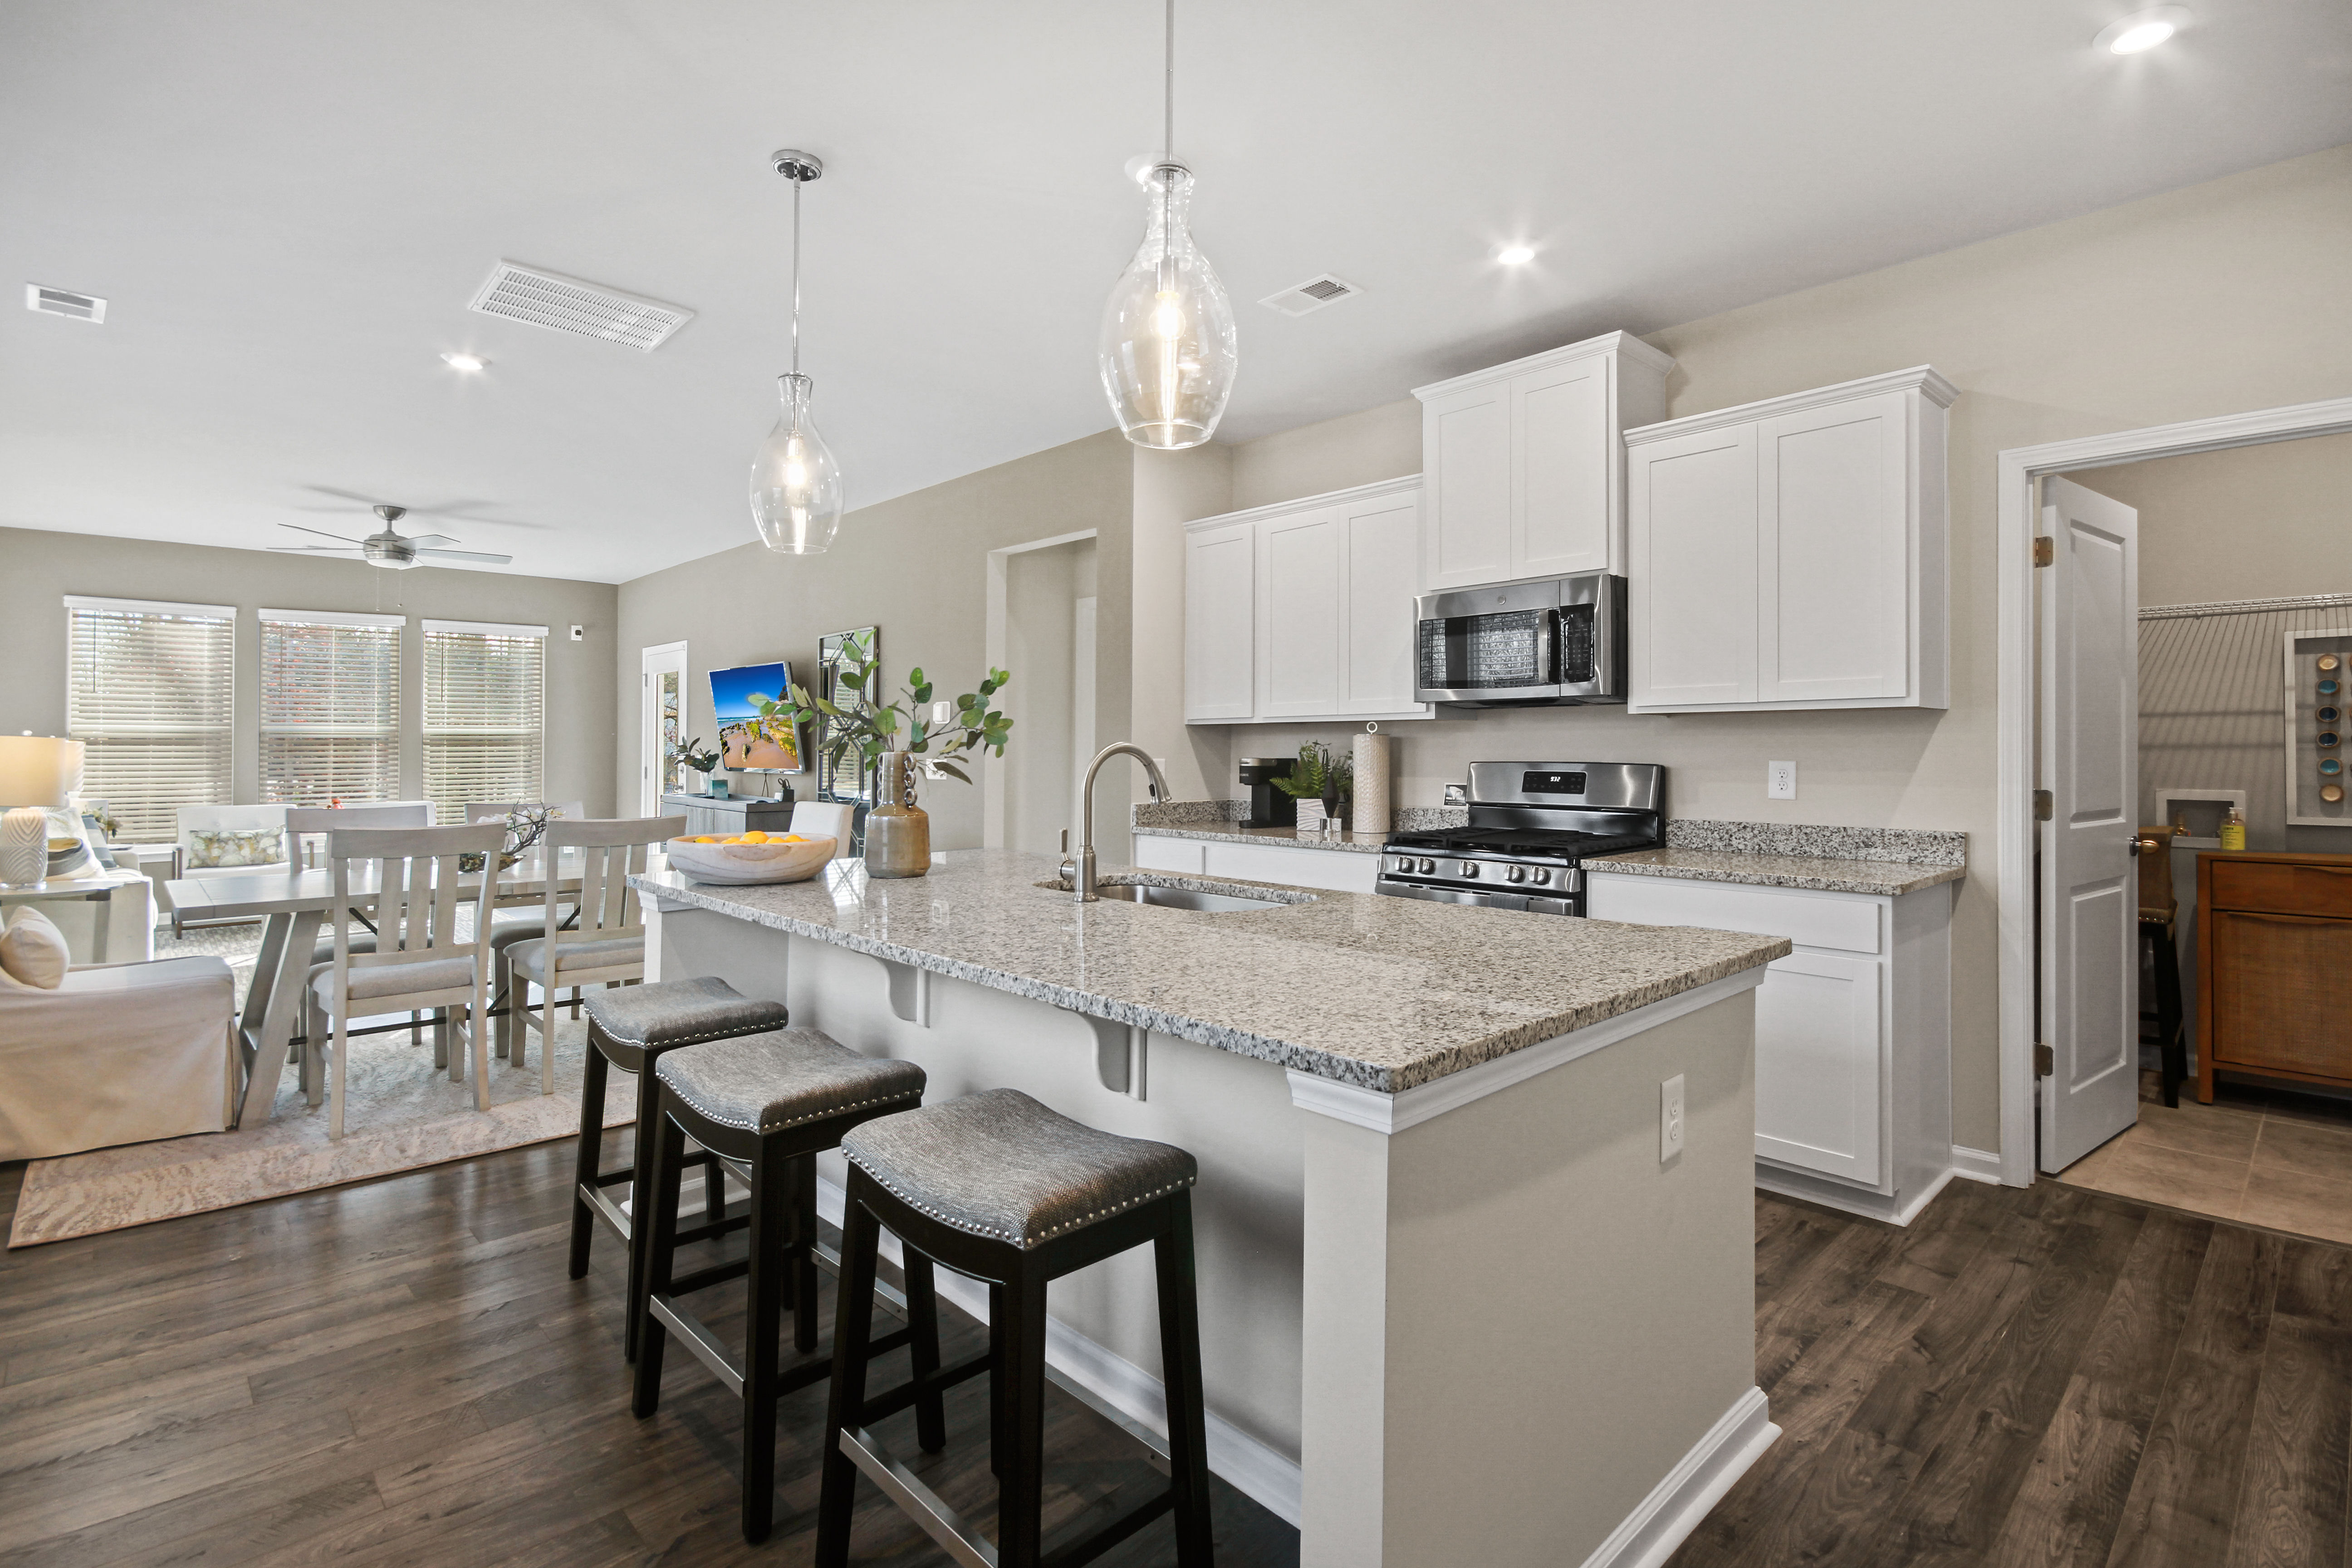 Open Kitchen Area with Island Seating at Westbriar Woods